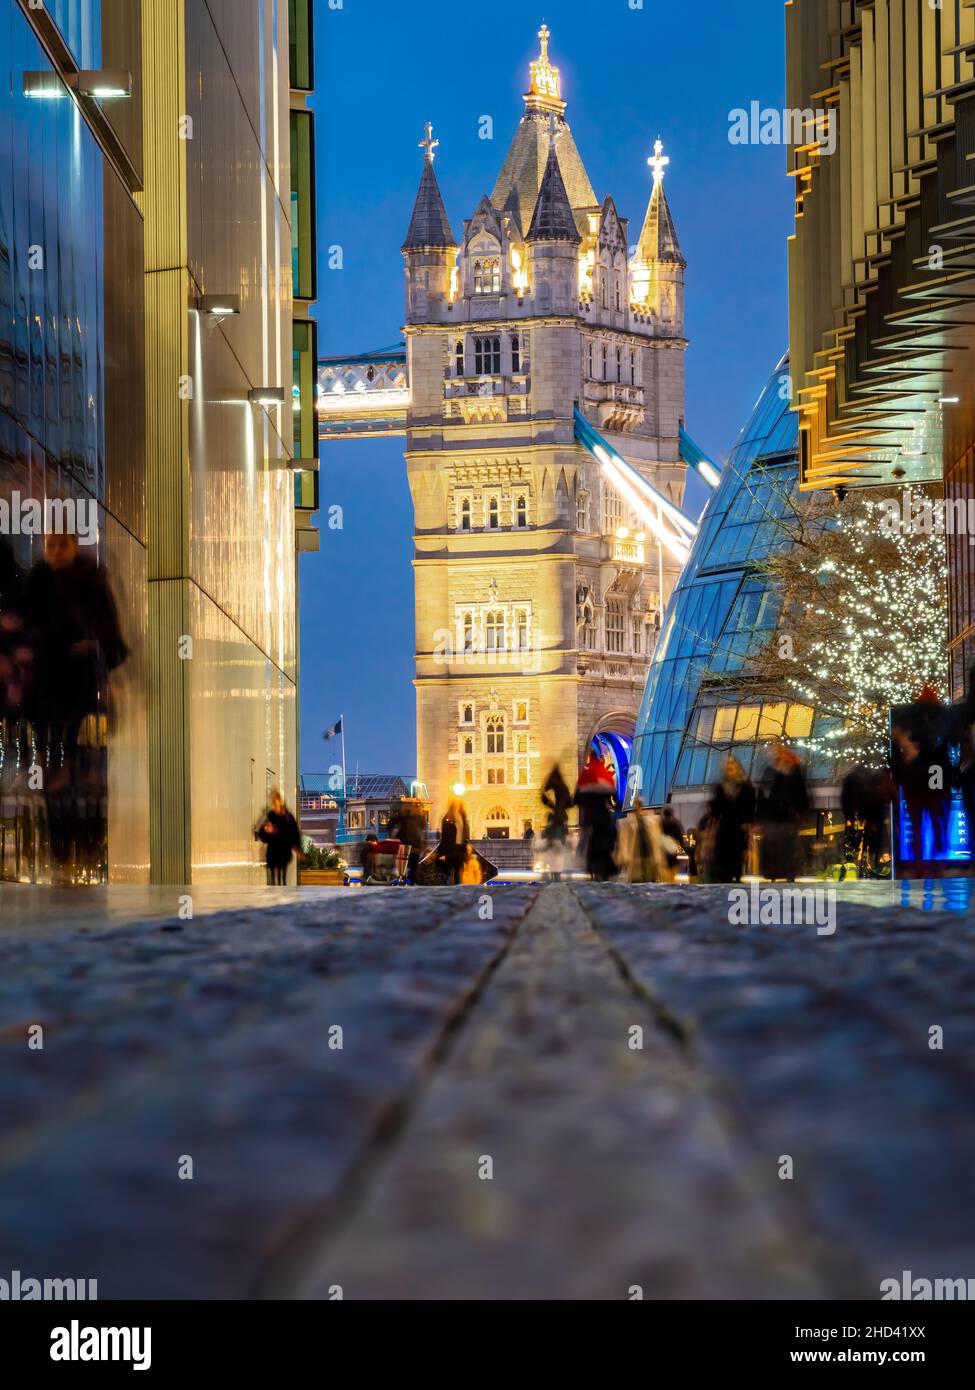 The famous Tower Bridge, view from a narrow street in the city of London at dusk to down, in England - United Kingdom Stock Photo